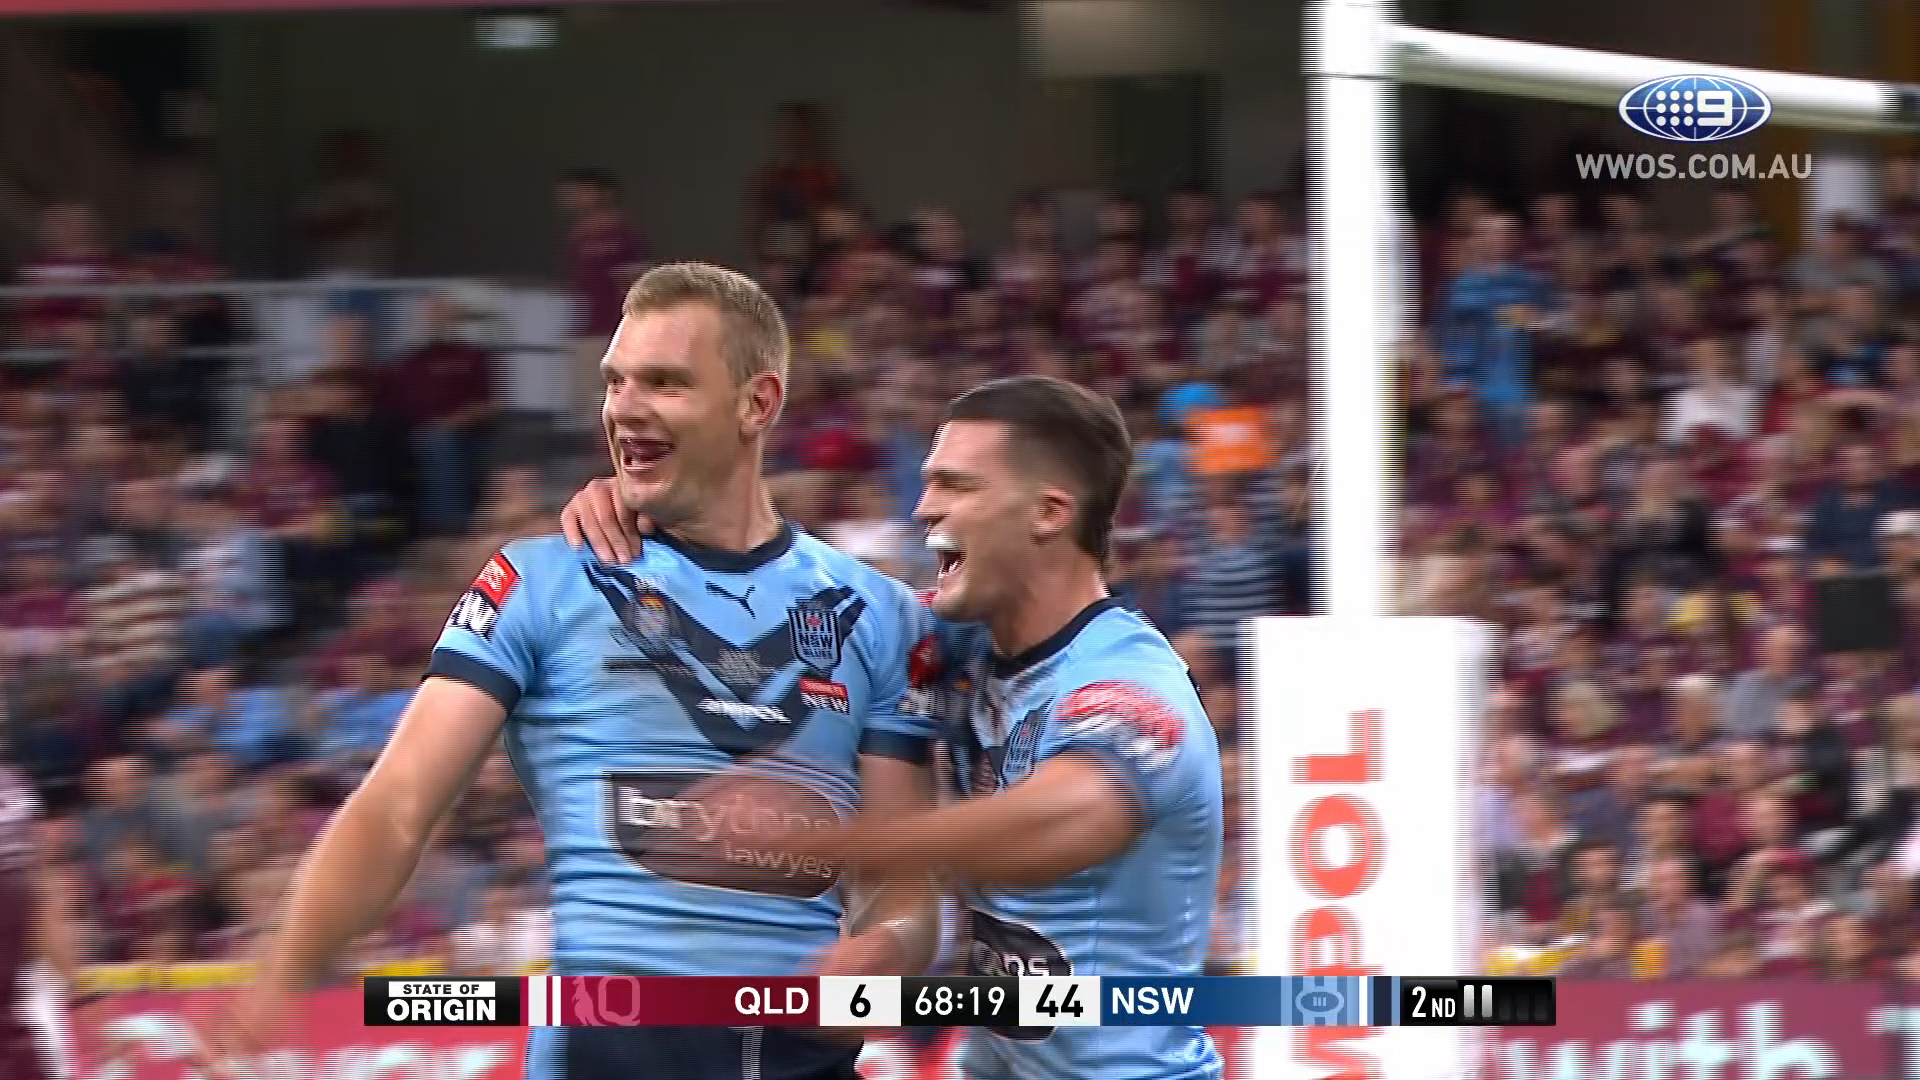 State of Origin Highlights: NSW v QLD - Game 1